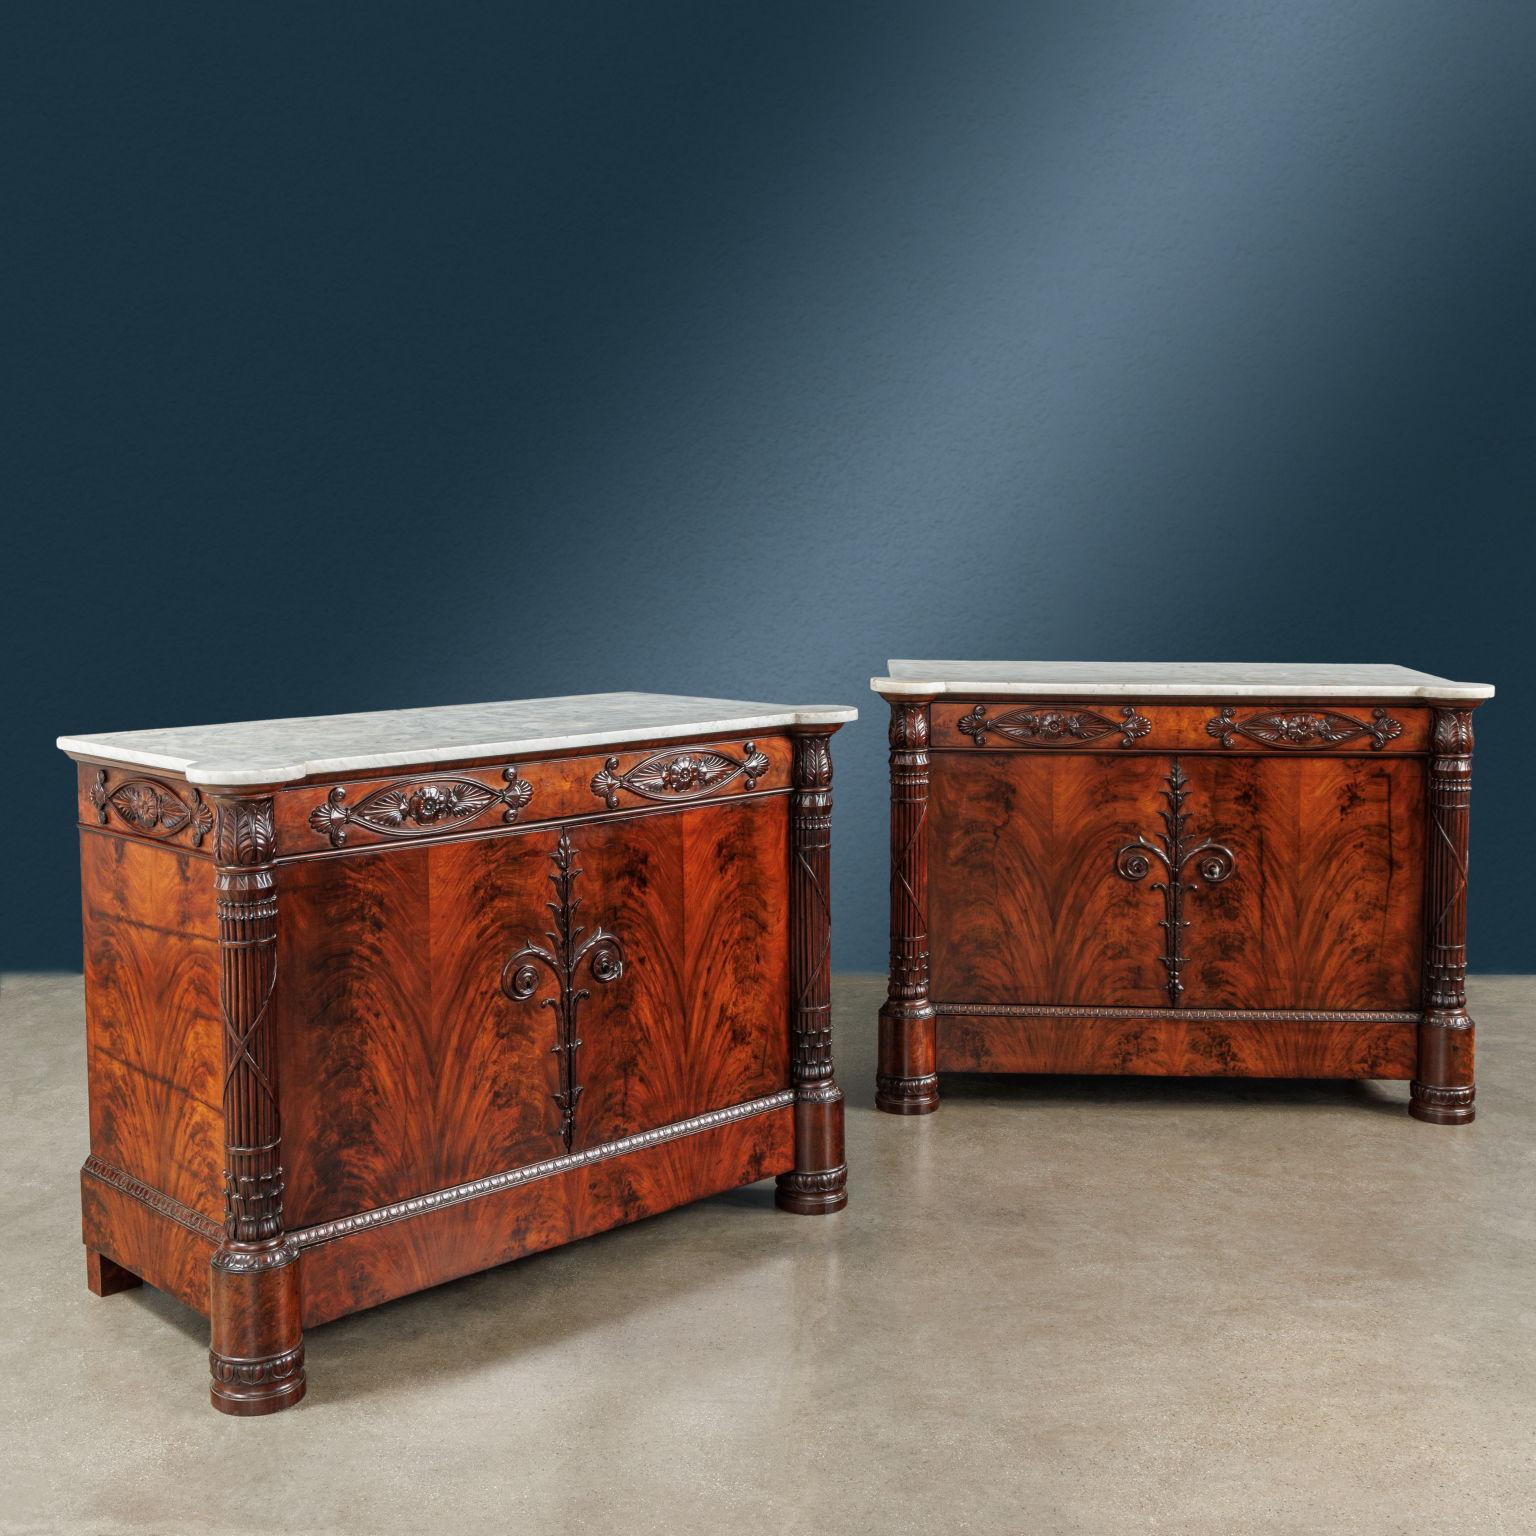 Pair of sideboards panelled in mahogany feather, resting on feet of which the front ones with a circular plinth, supporting uprights in the form of a lictor's fasces, terminating in leafy capitals. There is a pair of doors on the front to conceal